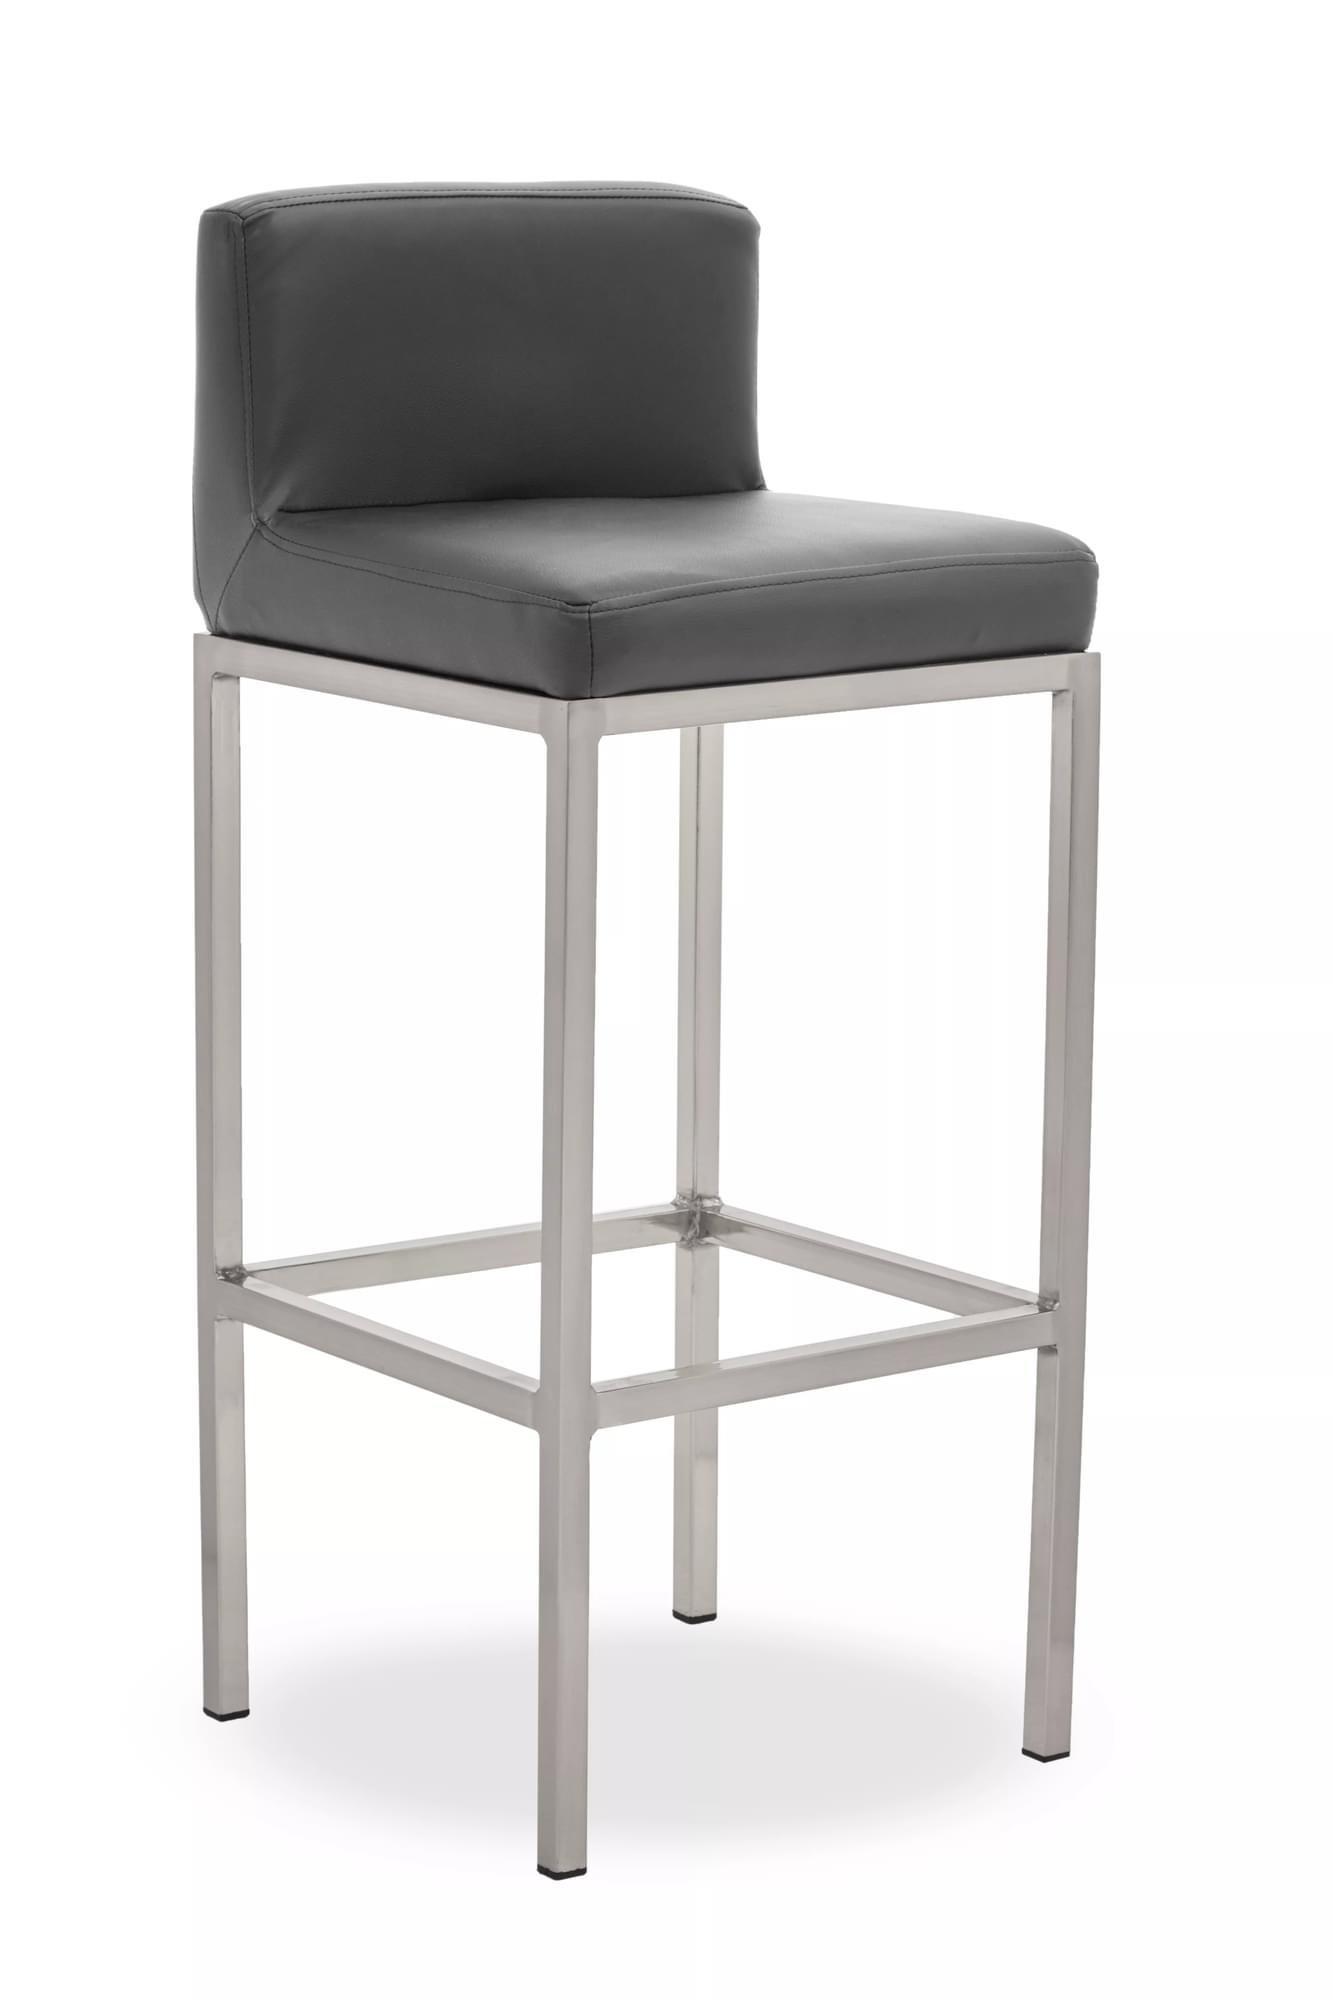 Interiors by Premier Baina Pu Finish Bar Chair with back